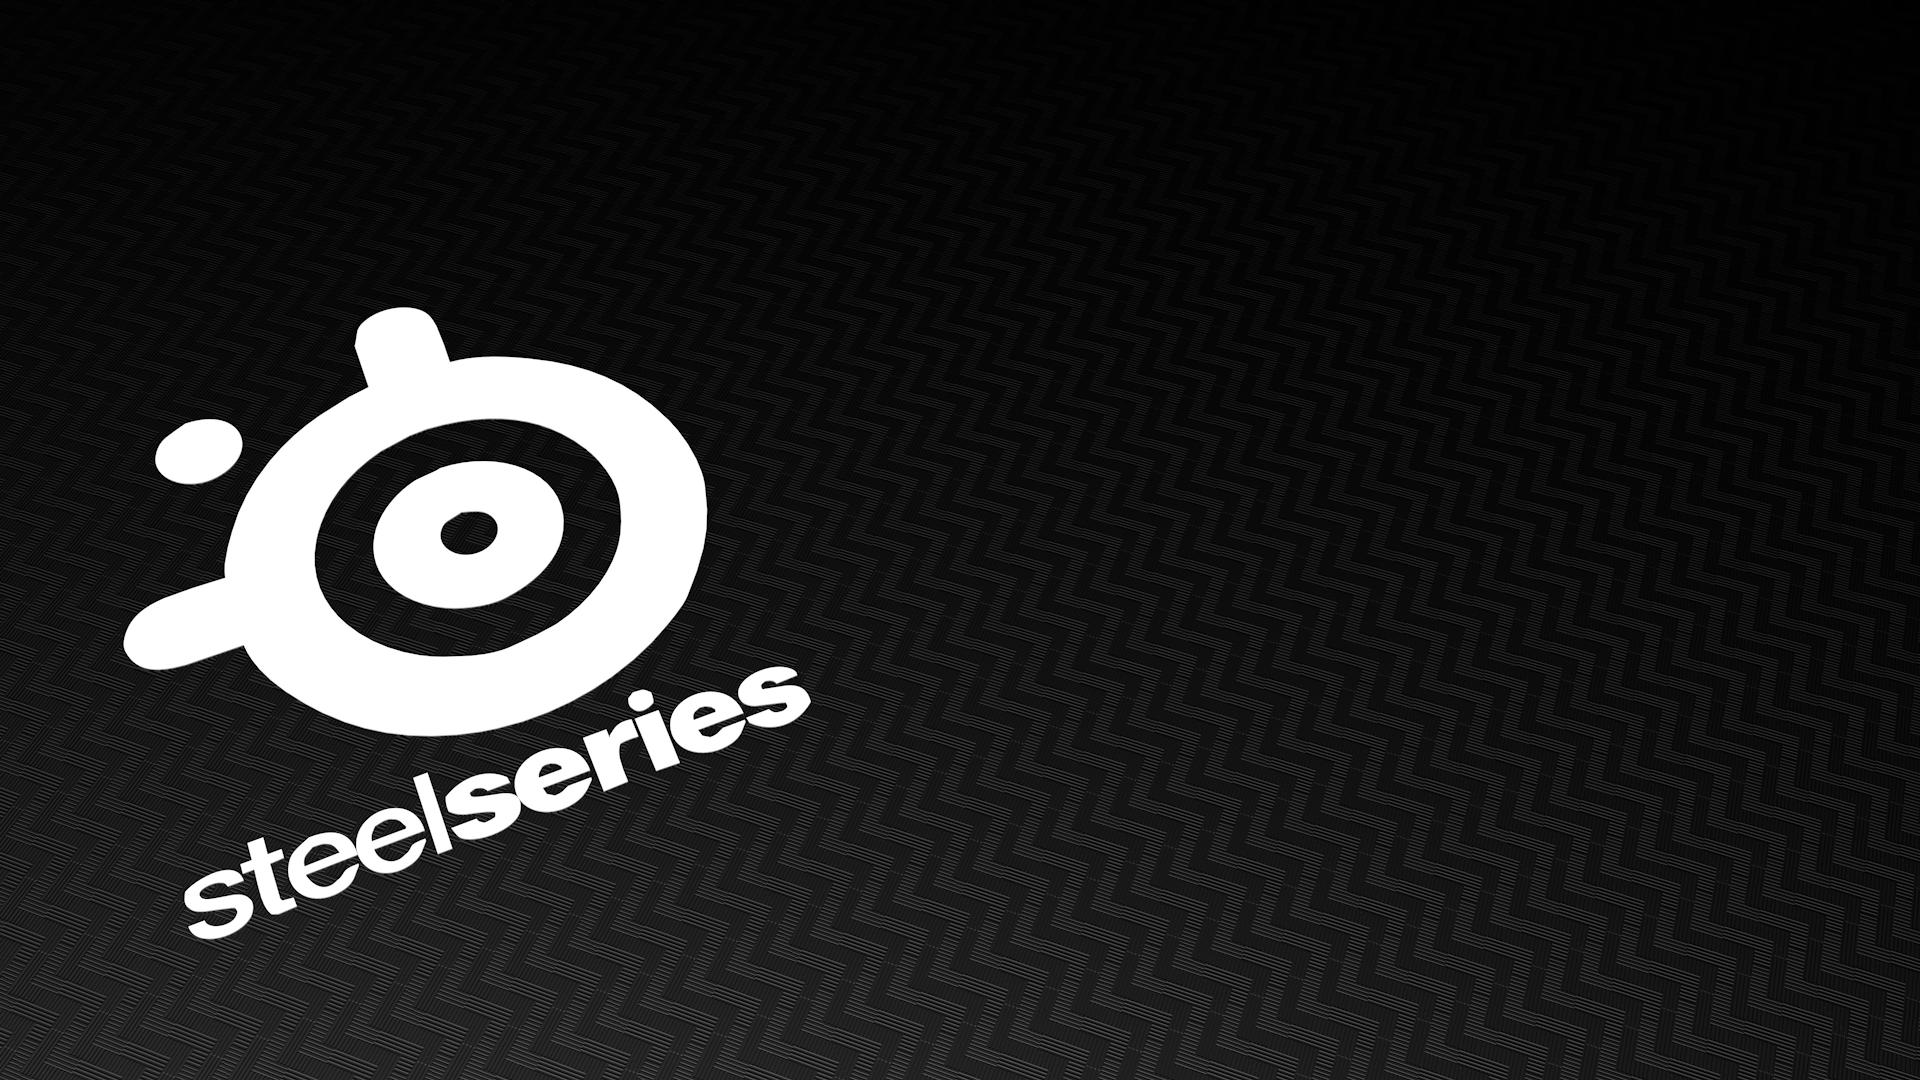 A Steelseries mousepad wallpaper I made : steelseries